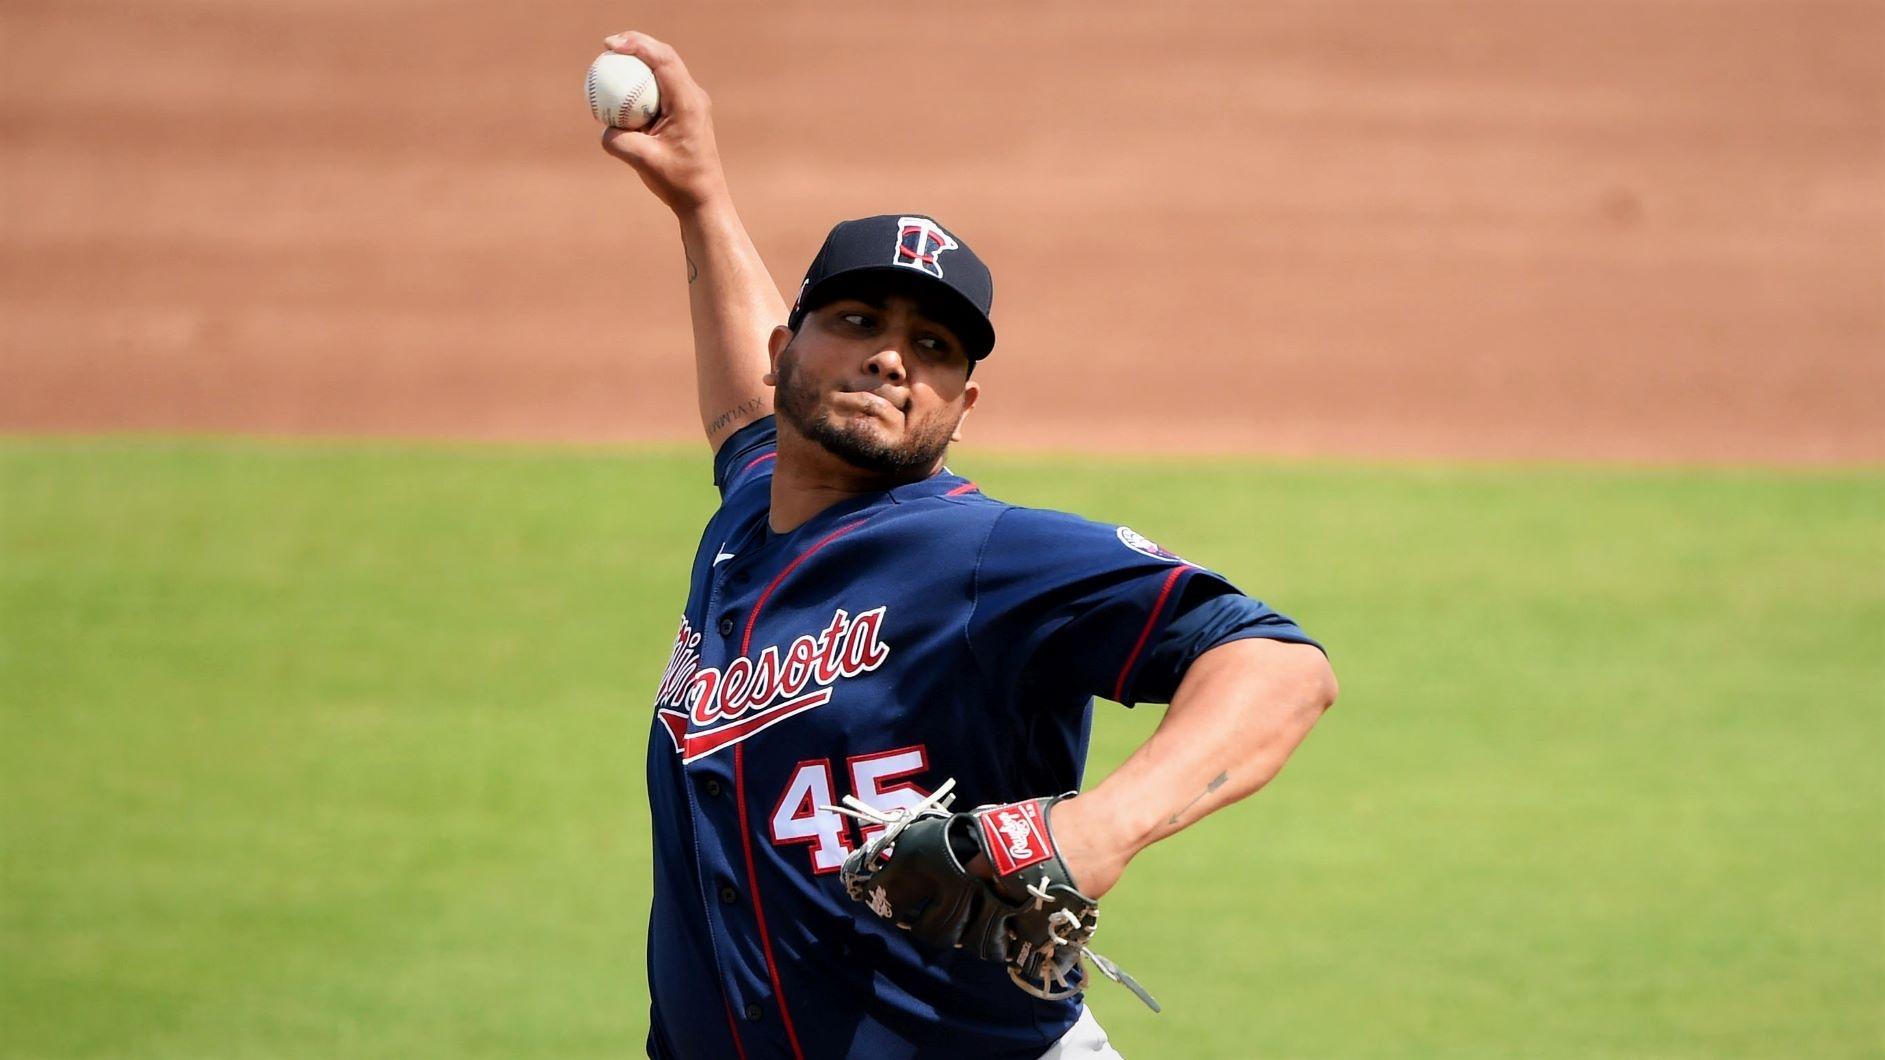 Feb 25, 2020; North Port, Florida, USA; Minnesota Twins starting pitcher Jhoulys Chacin (45) pitching against the Atlanta Braves during the first inning at CoolToday Park. Mandatory Credit: John David Mercer-USA TODAY Sports / John David Mercer-USA TODAY Sports